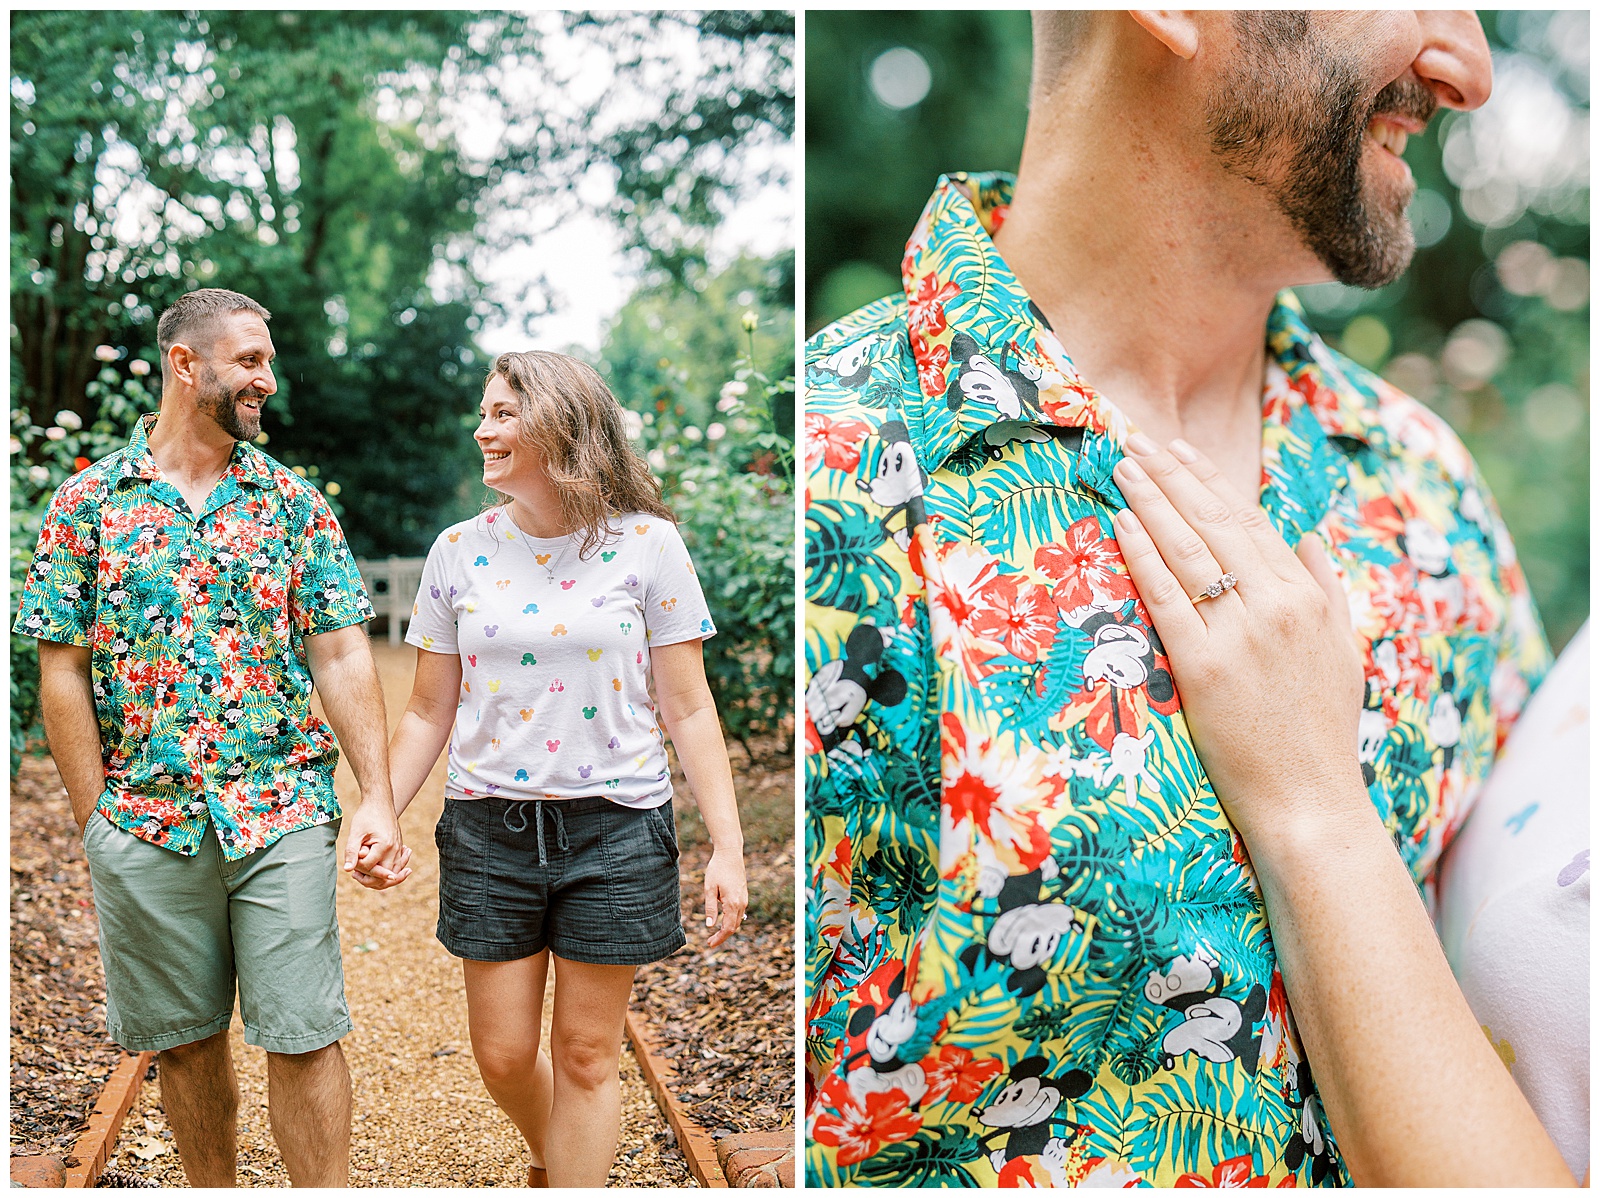 Disney T-shirt Outfit for Family Photoshoot at Duke Mansion Gardens in North Carolina Engagement Session